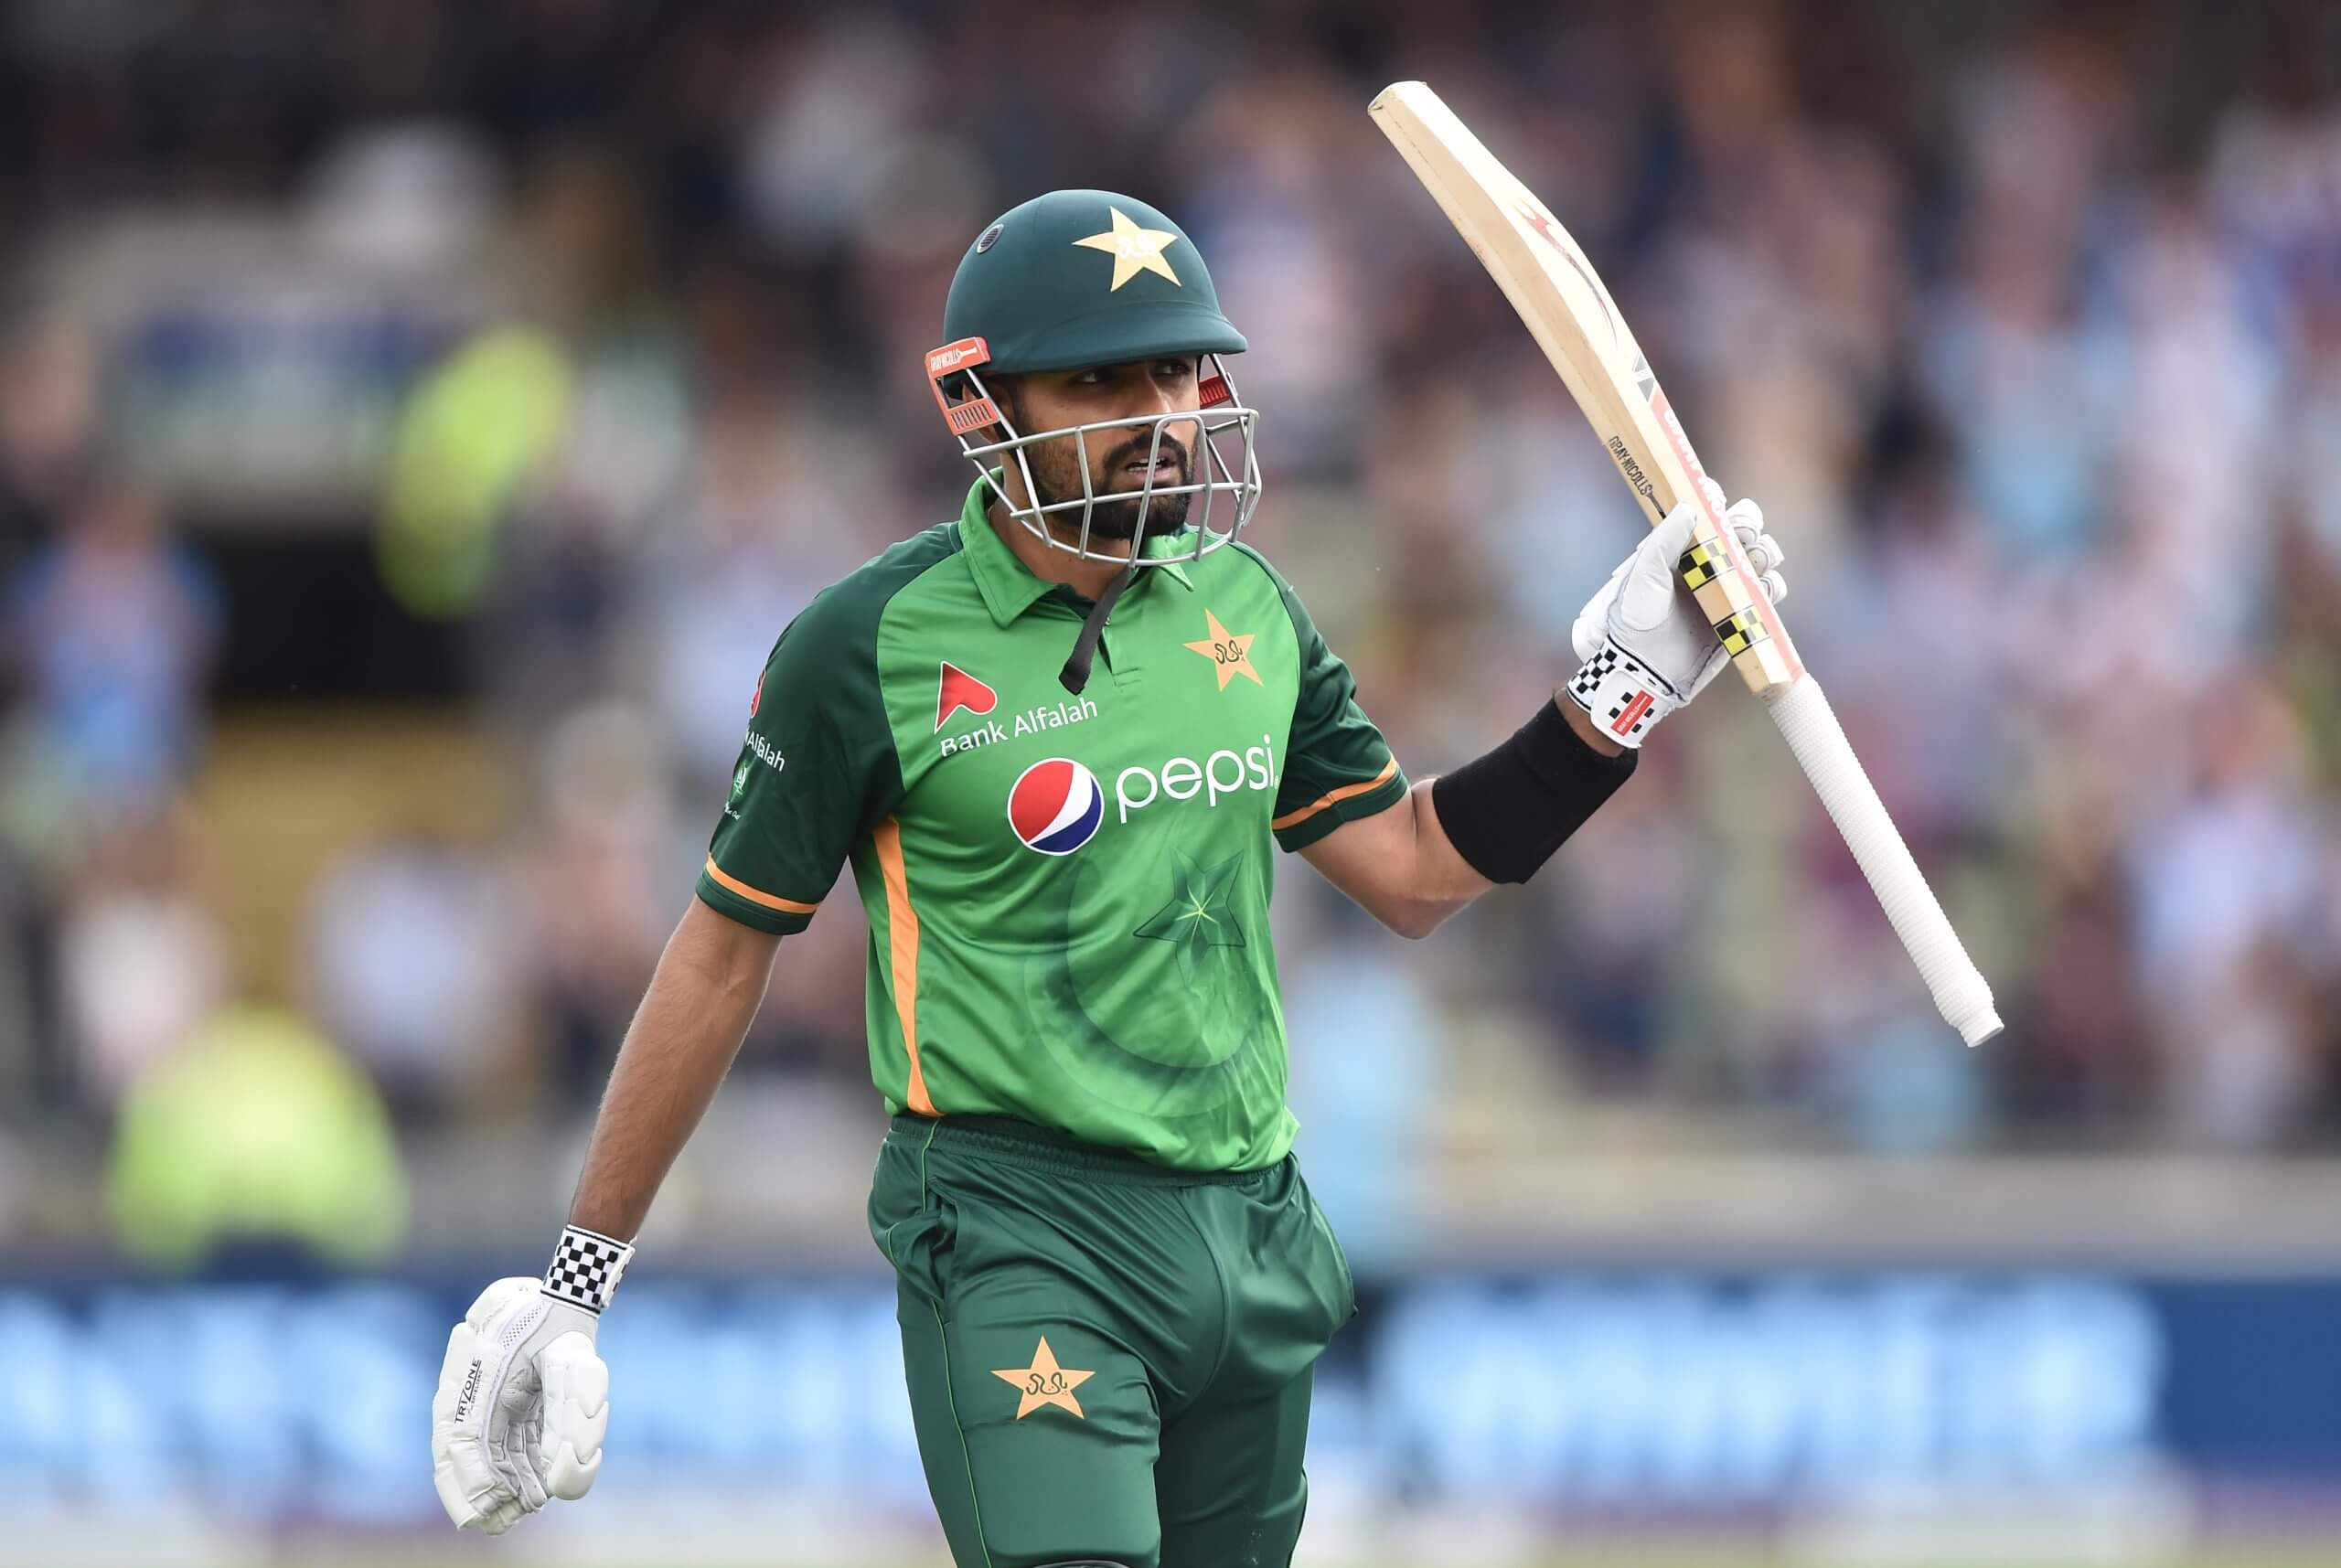 ICC name Babar Azam as Men’s Cricketer of the Year and Men’s ODI Player of the Year for 2022